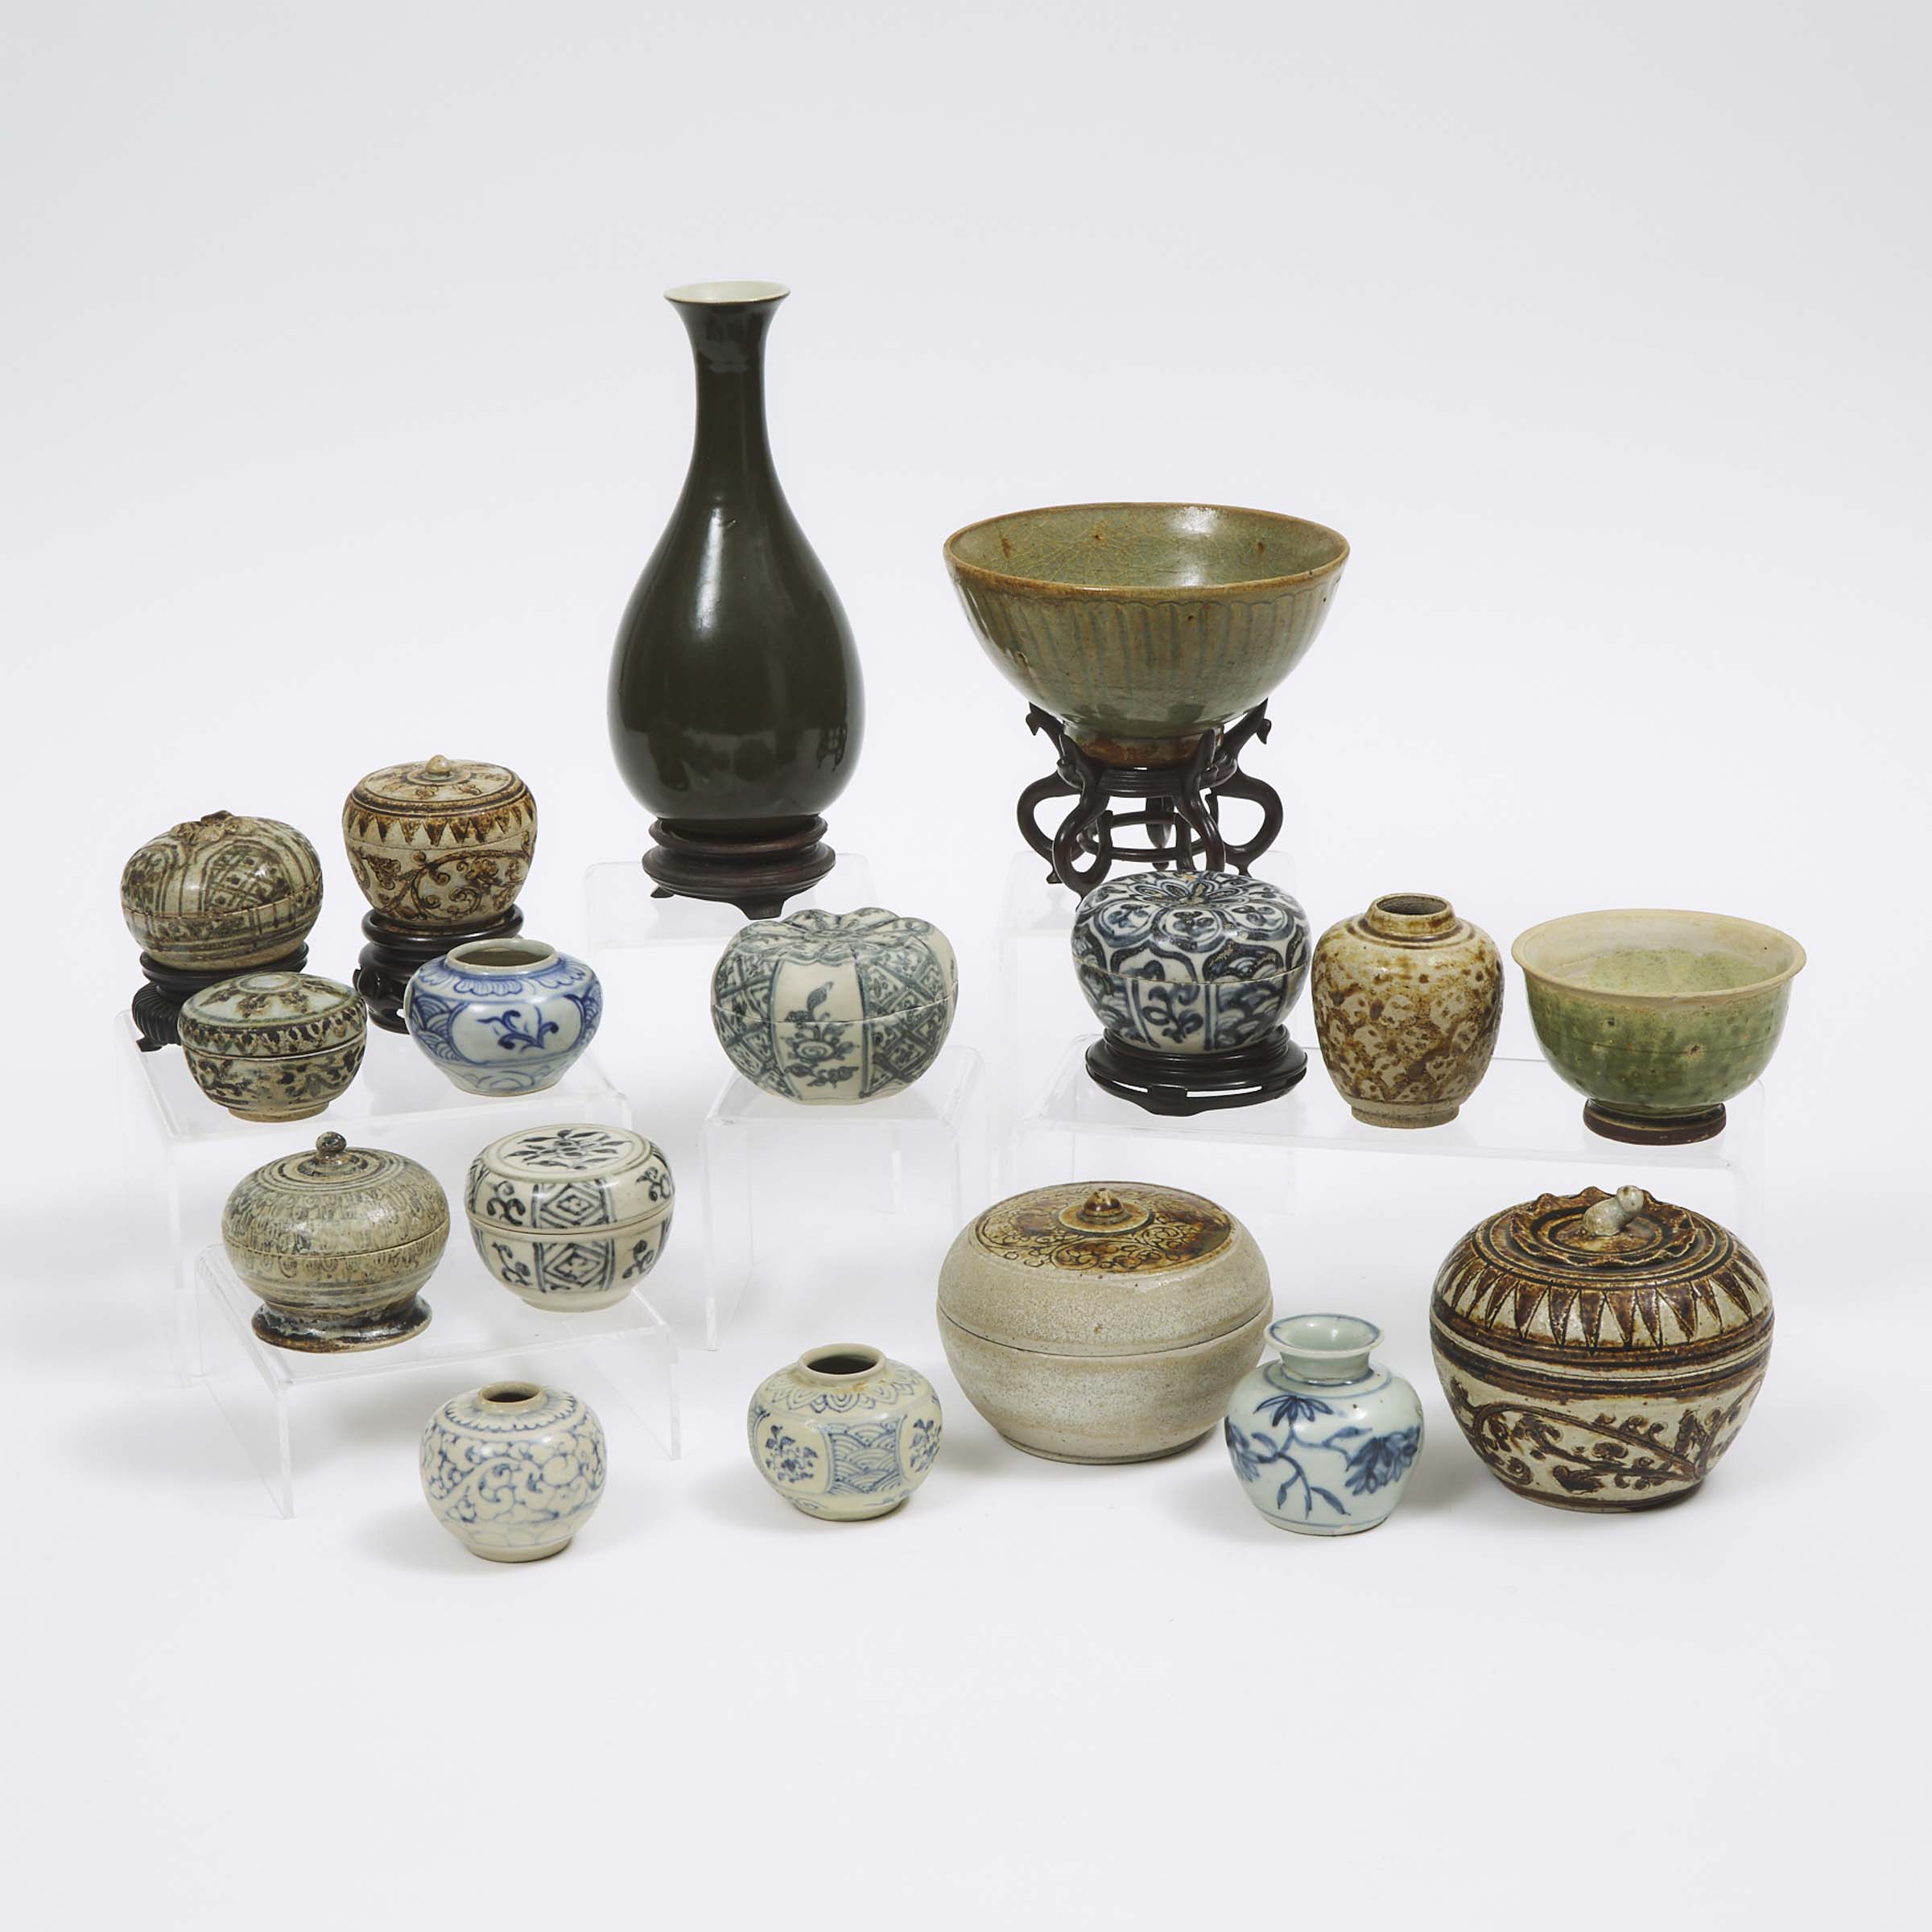 A Group of Seventeen Annamese, Sawankhalok, and Southeast Asian Ceramics, 15th Century and Later